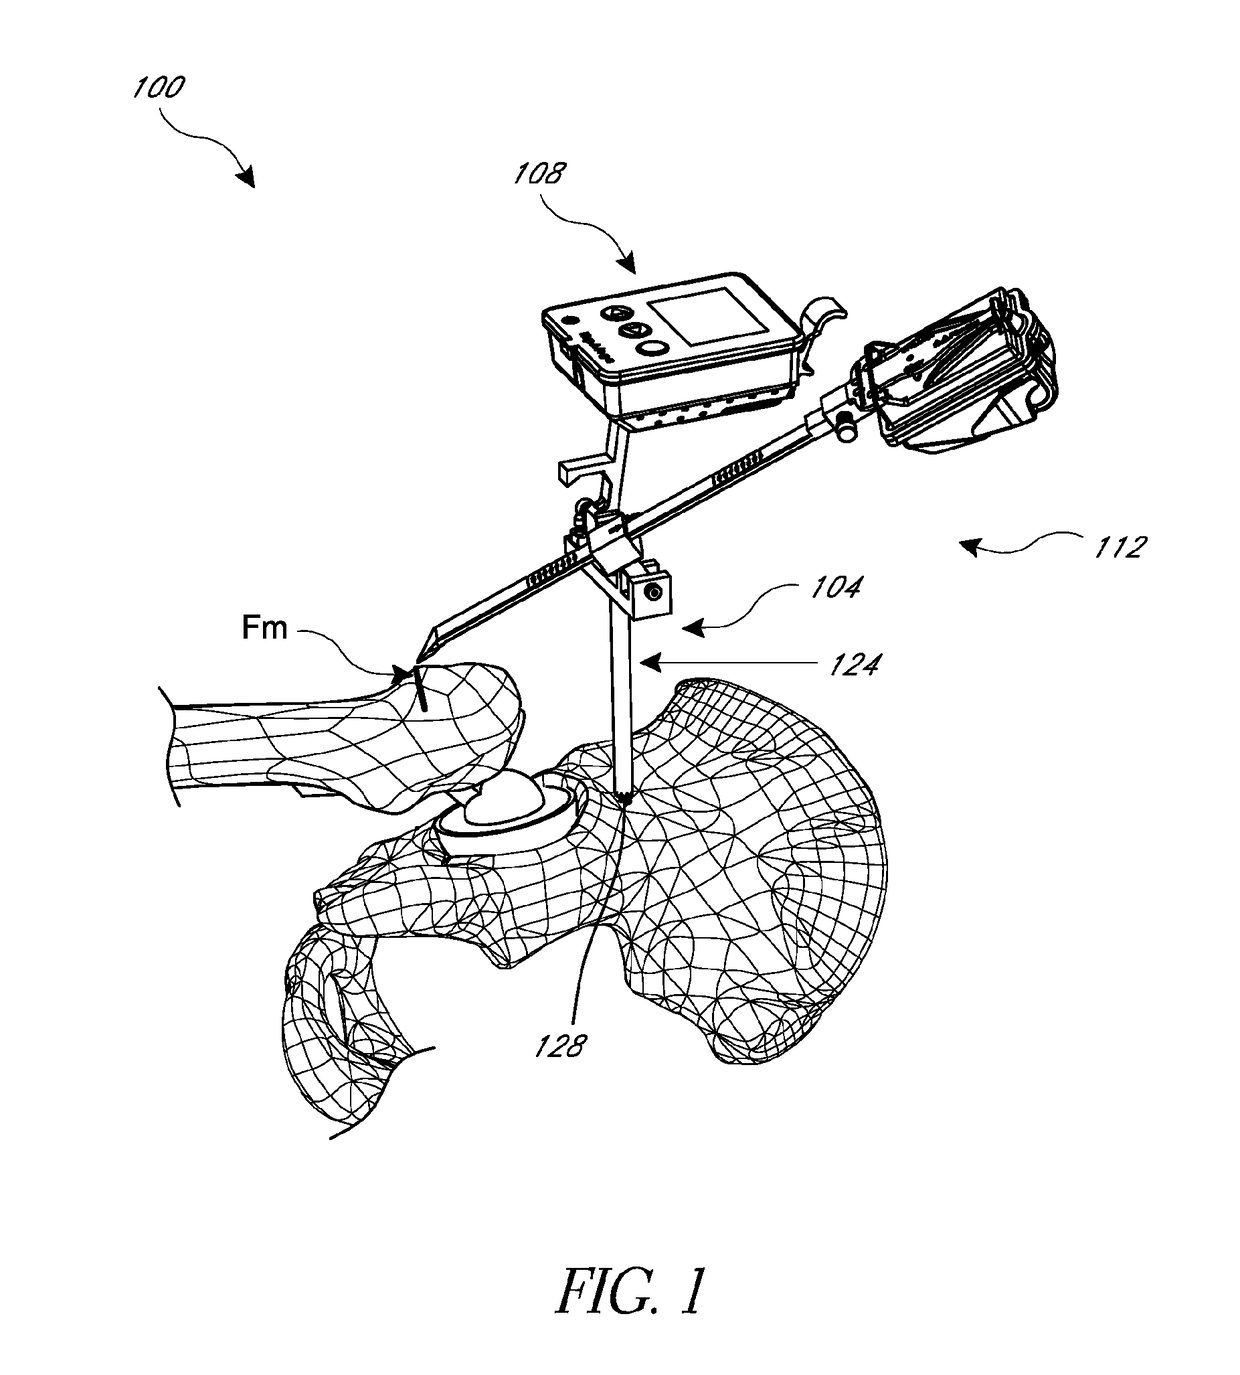 Hip replacement navigation system and method